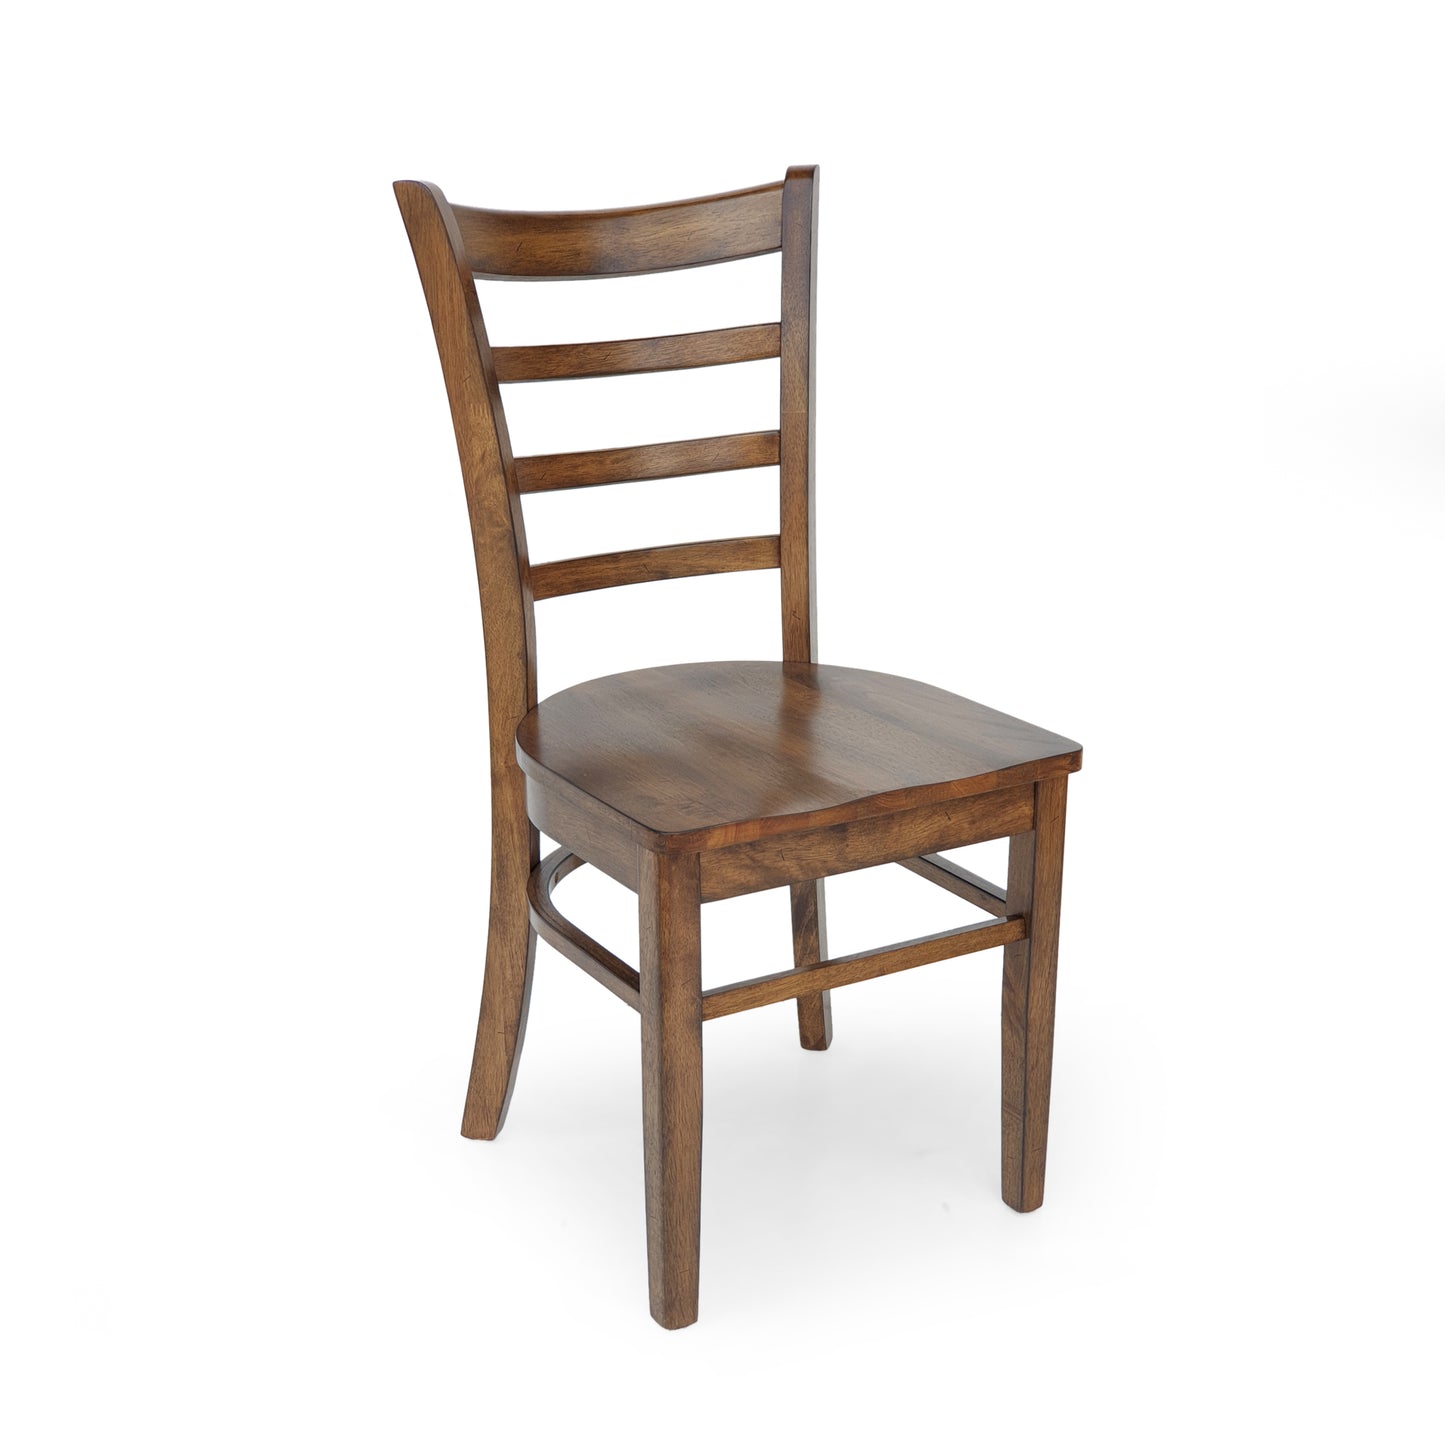 Wagner Farmhouse Wooden Dining Chairs (Set of 2)